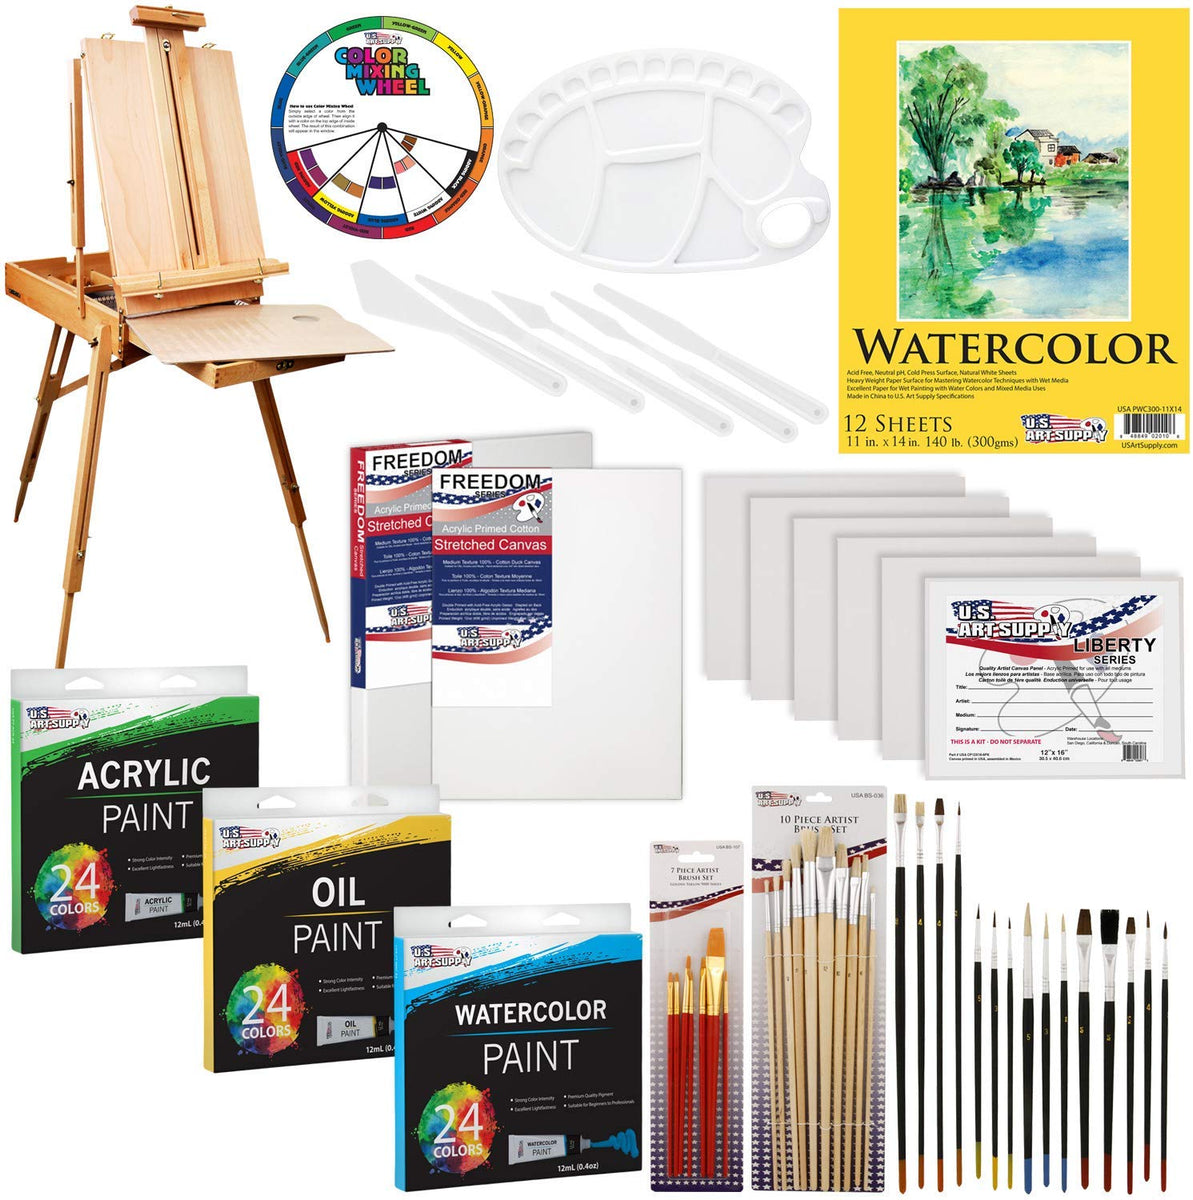 US ART SUPPLY 121-Piece Custom Artist Painting Kit – Pete's Arts, Crafts  and Sewing